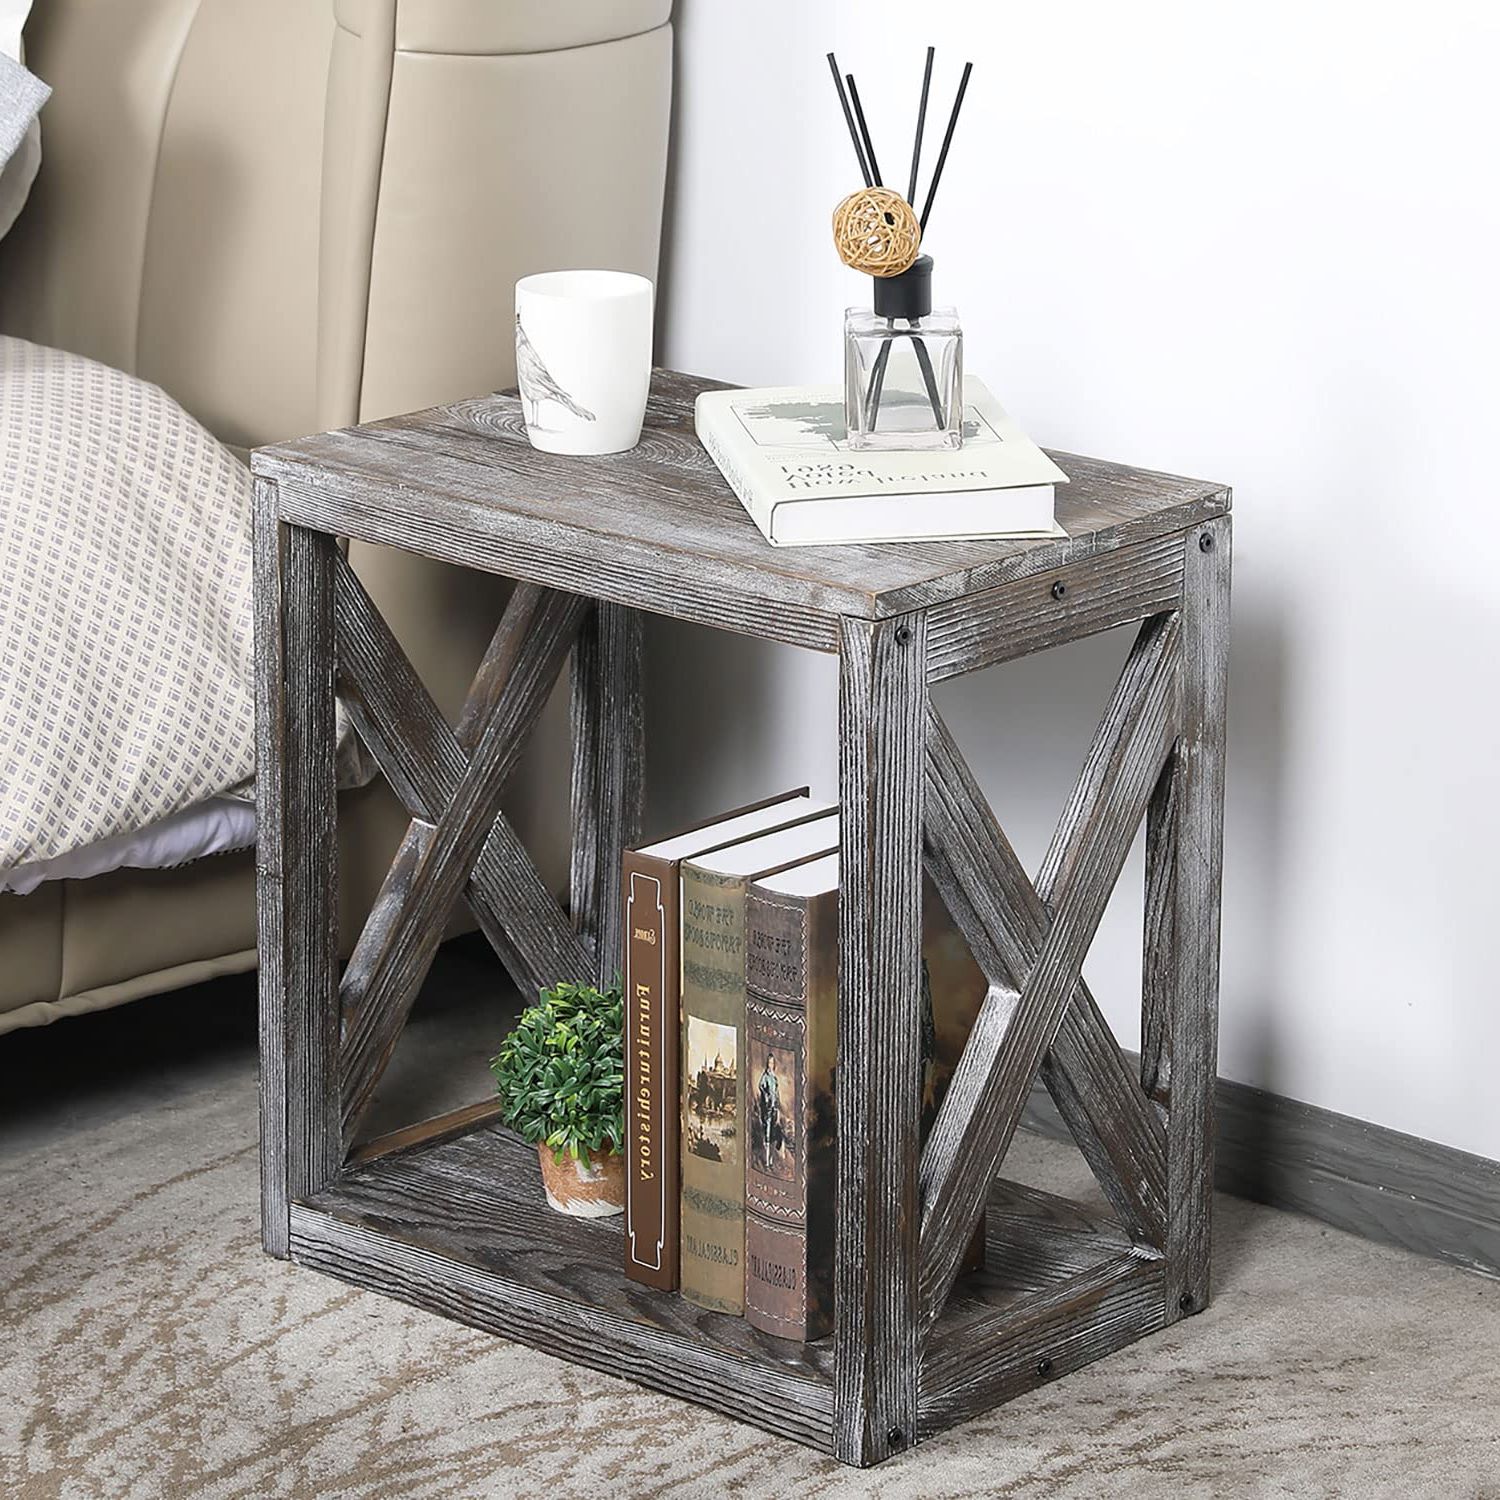 Latest Amazon: Mygift Vintage Gray Solid Wood Small End Table/side Table/night  Stand/bedside Table With X Design And Bottom Storage Shelf, Decorative  Sturdy Nightstand : Home & Kitchen Regarding Rustic Gray End Tables (View 7 of 10)